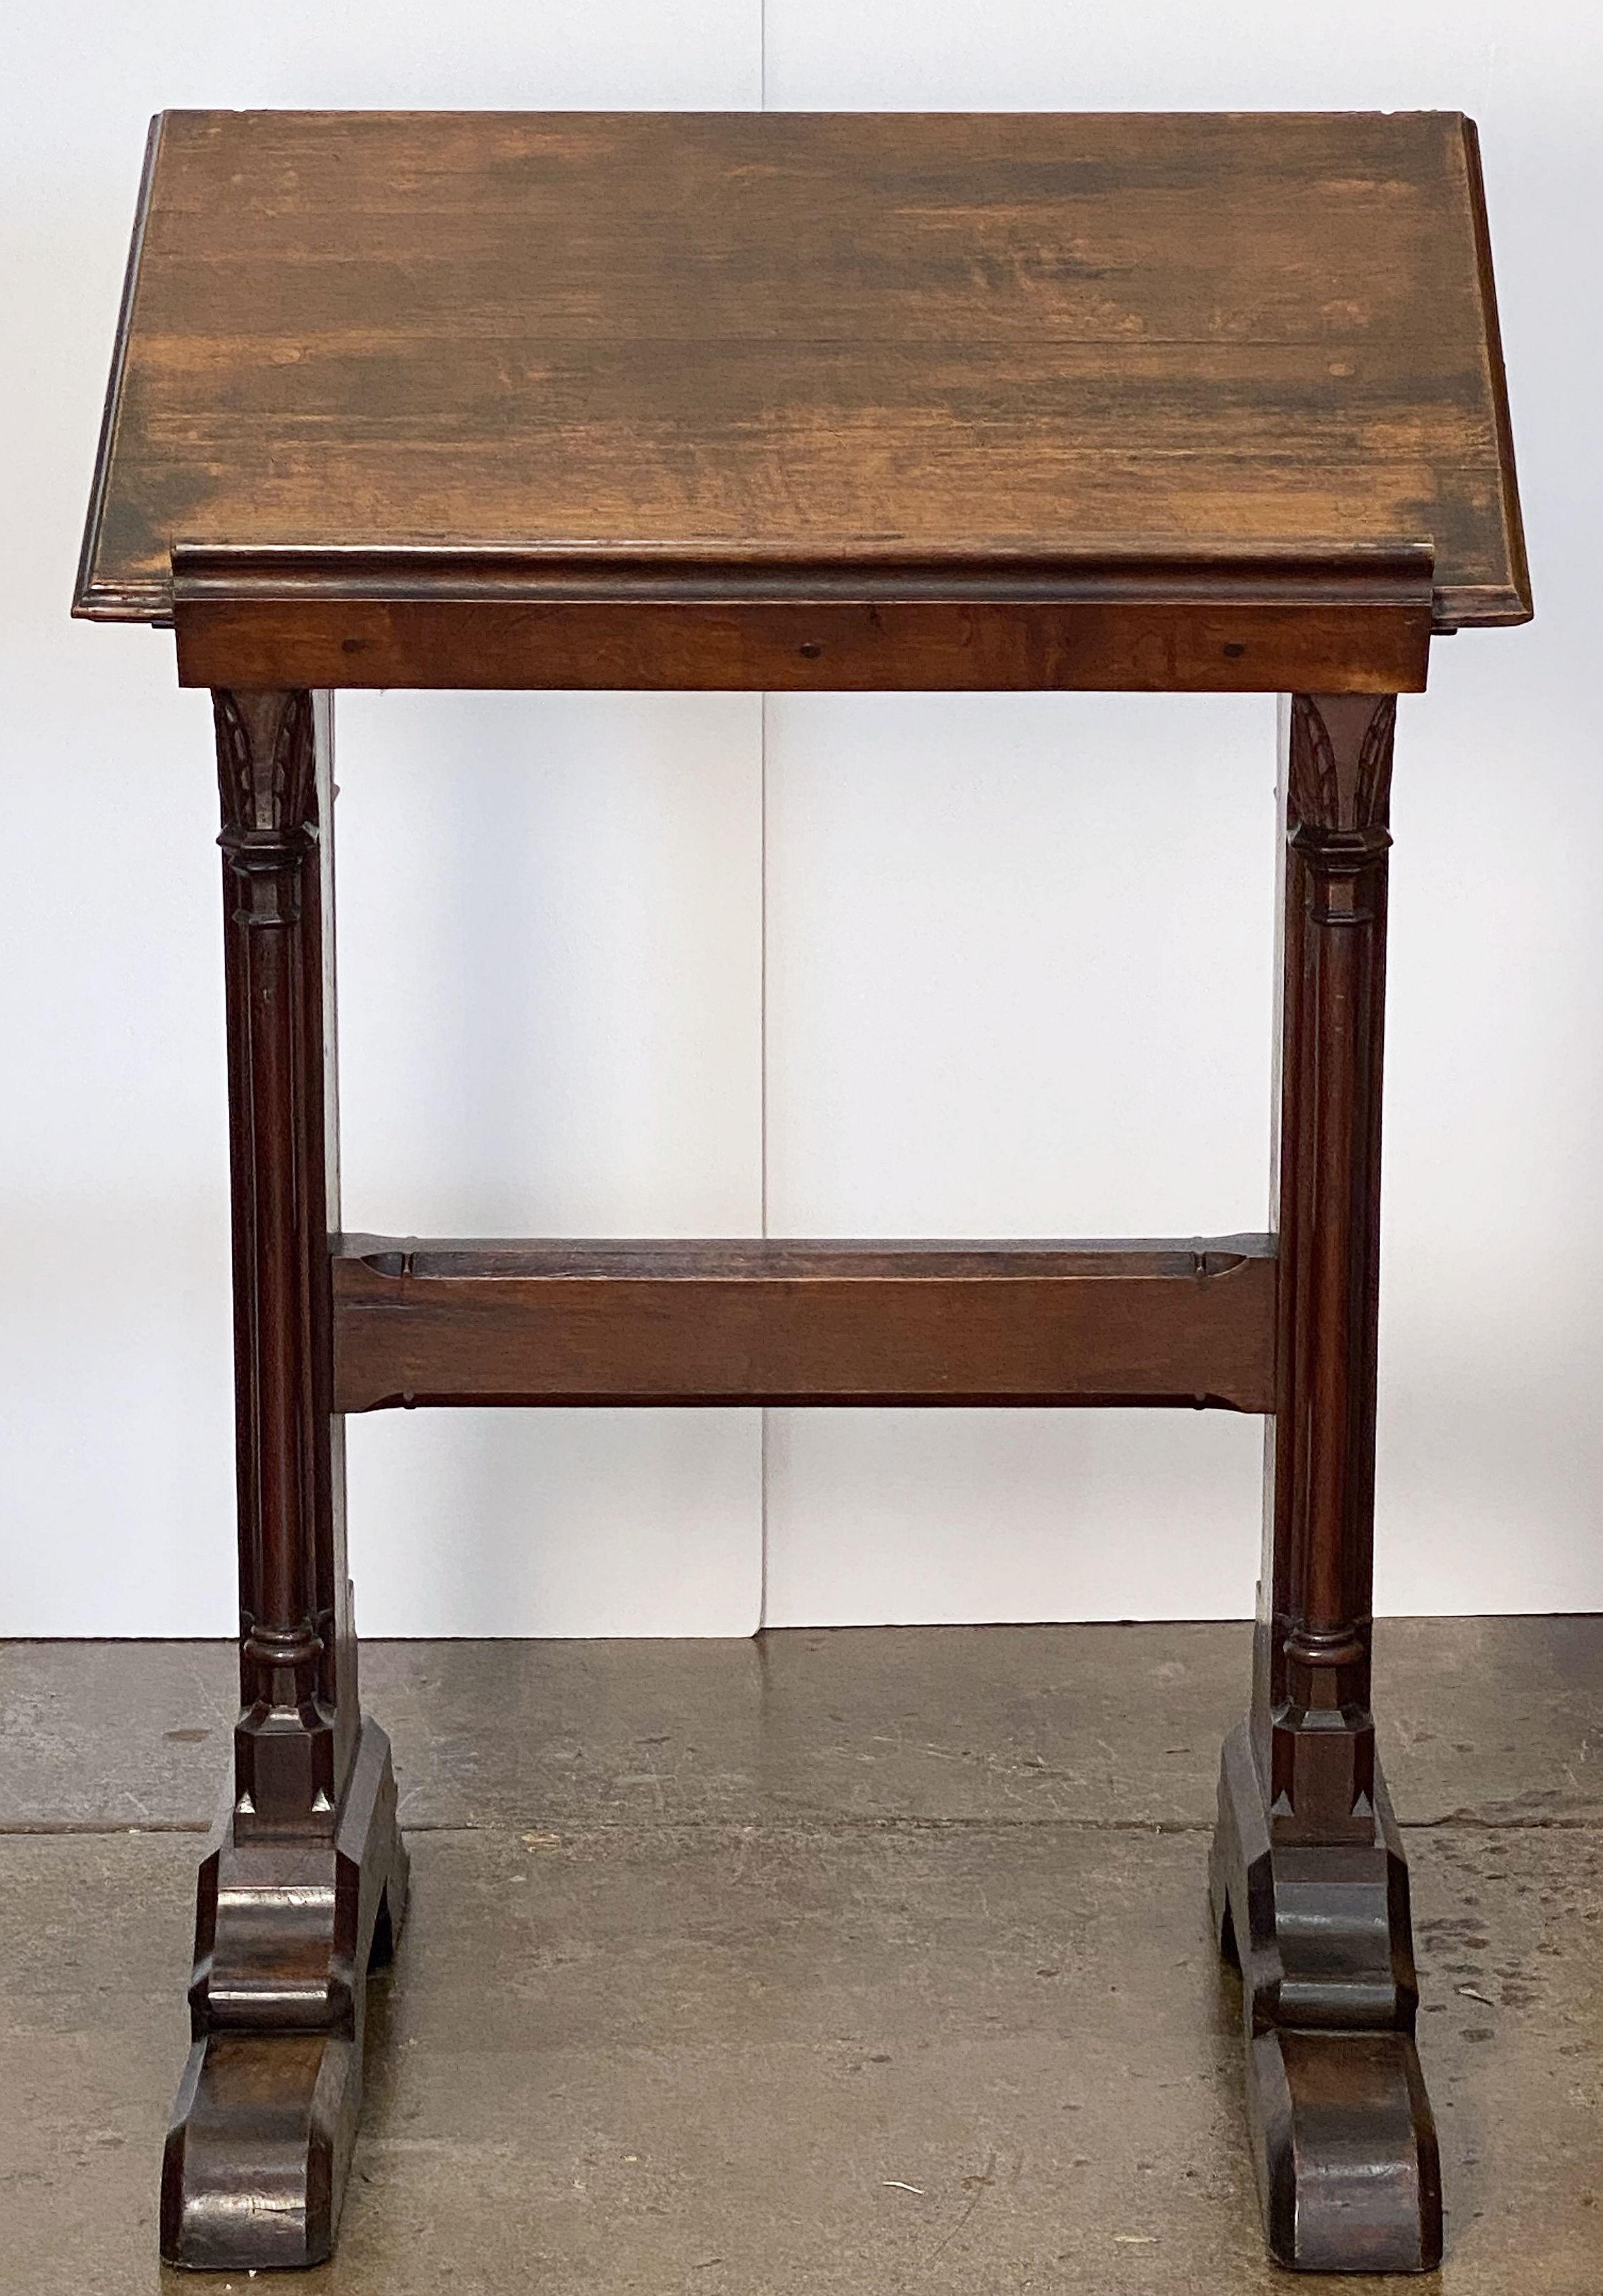 A handsome large English ecclesiastical standing lectern or easel of oak in the Gothic style, featuring one side with slanted stand with support rest for a book, the whole with carved Gothic designs, on a two-legged support.

Perfect for a collector